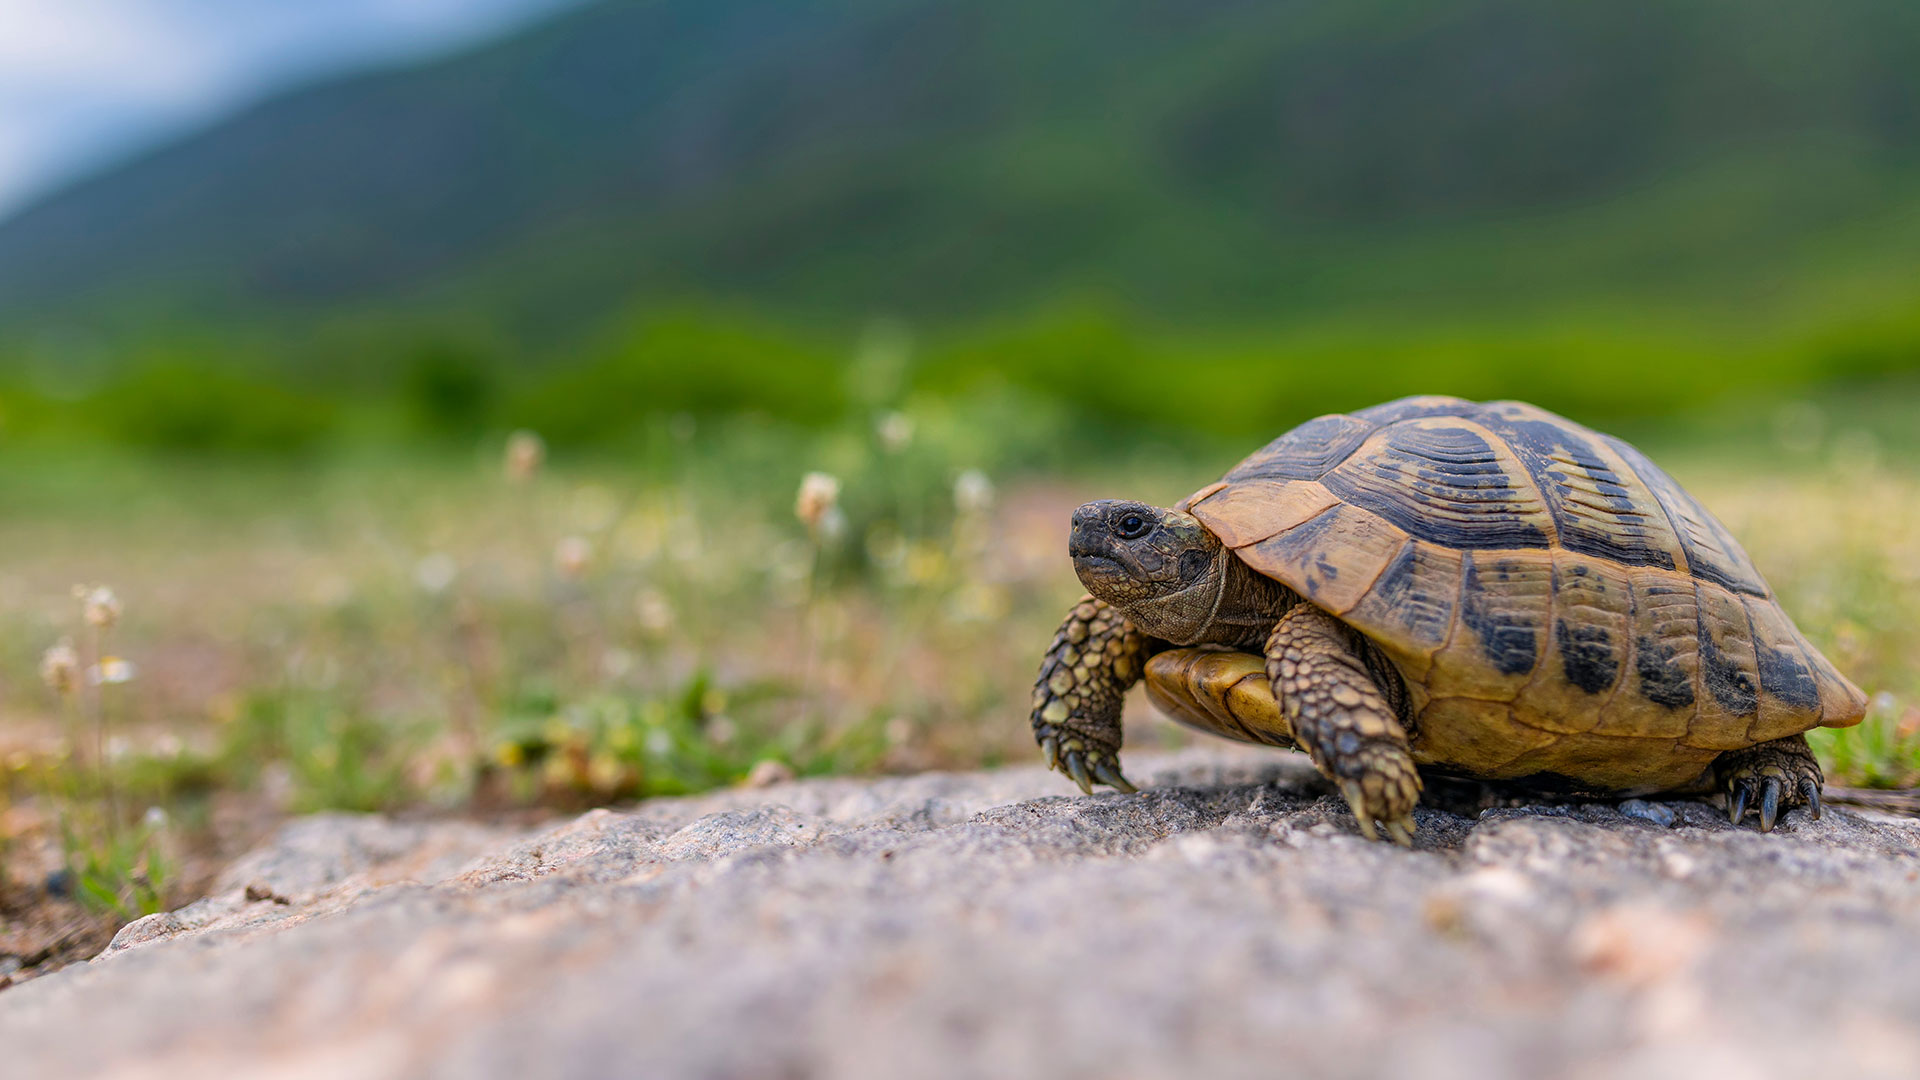 Tortoise in natural environment